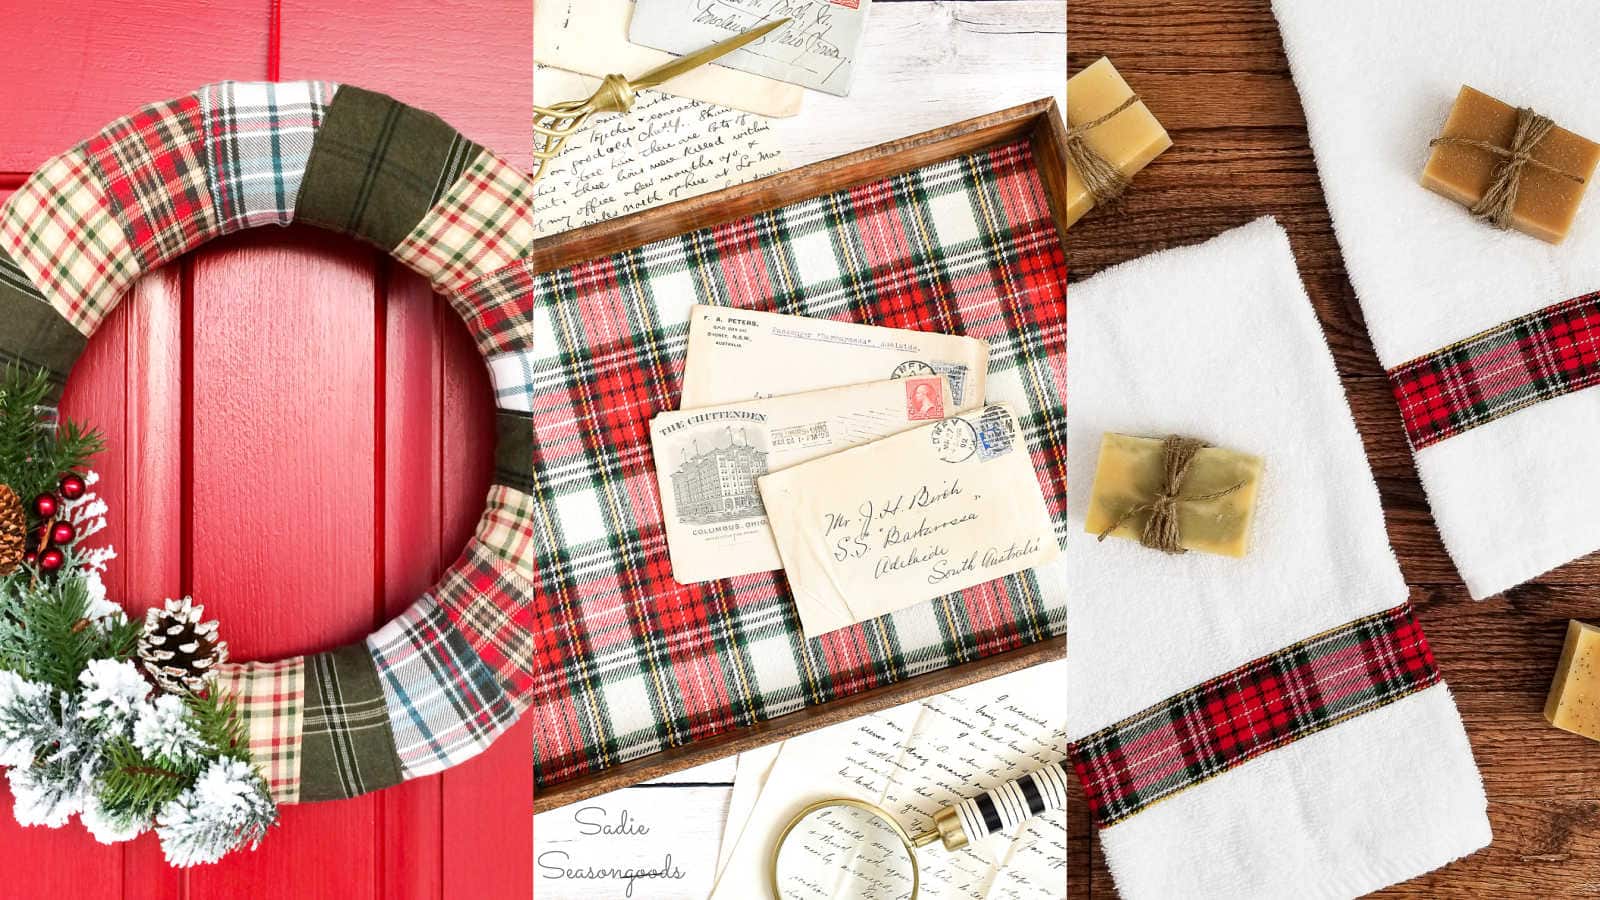 Flannel Decor for a Cozy Home